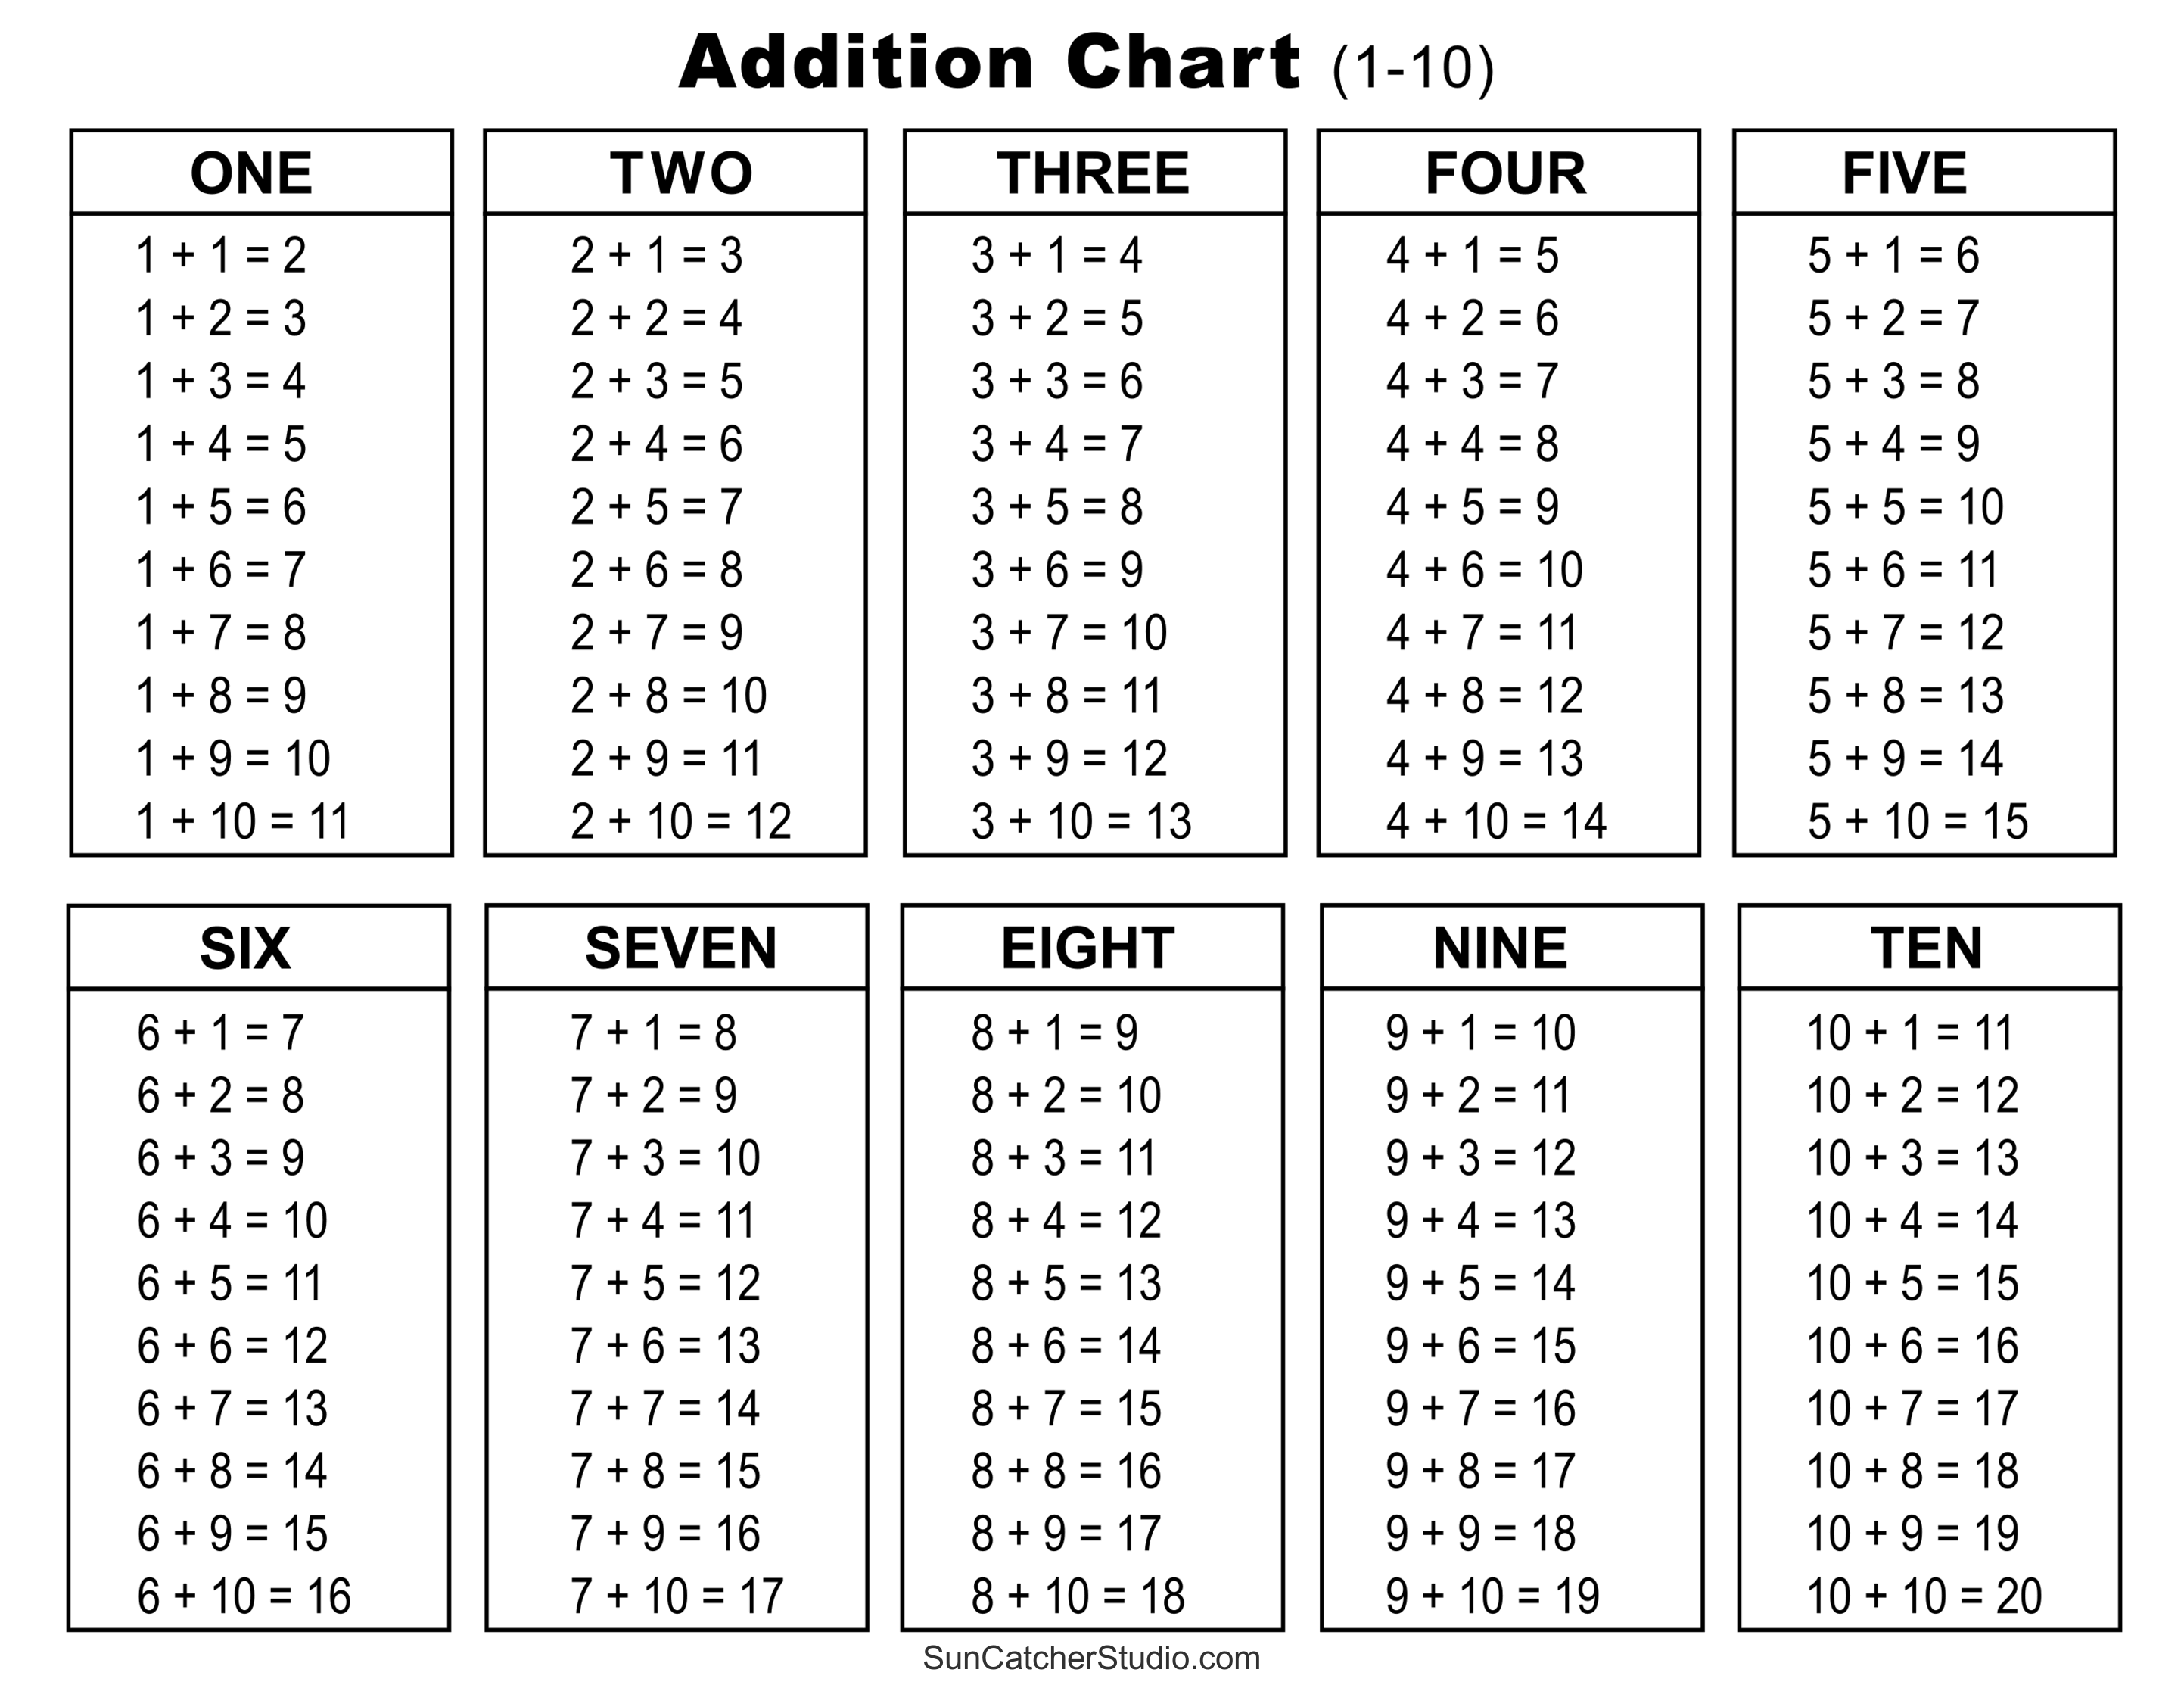 addition-charts-tables-worksheets-free-printable-pdf-files-diy-projects-patterns